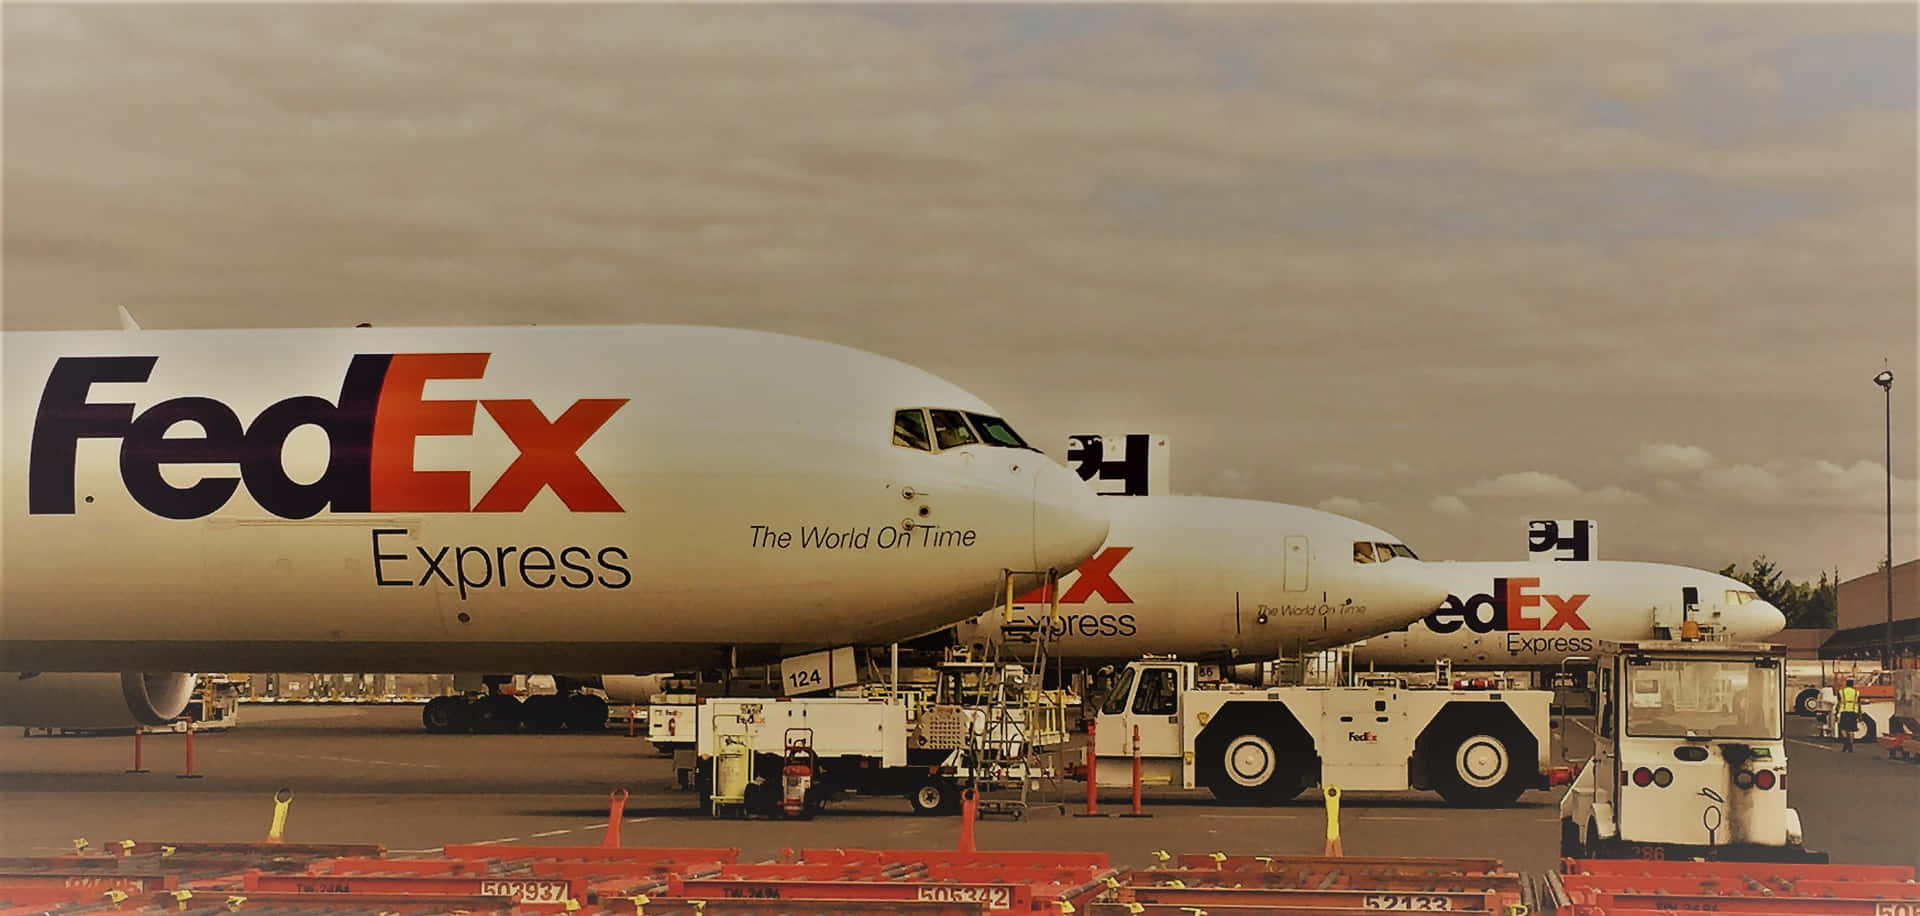 Ship your critical packages around the world with FedEx